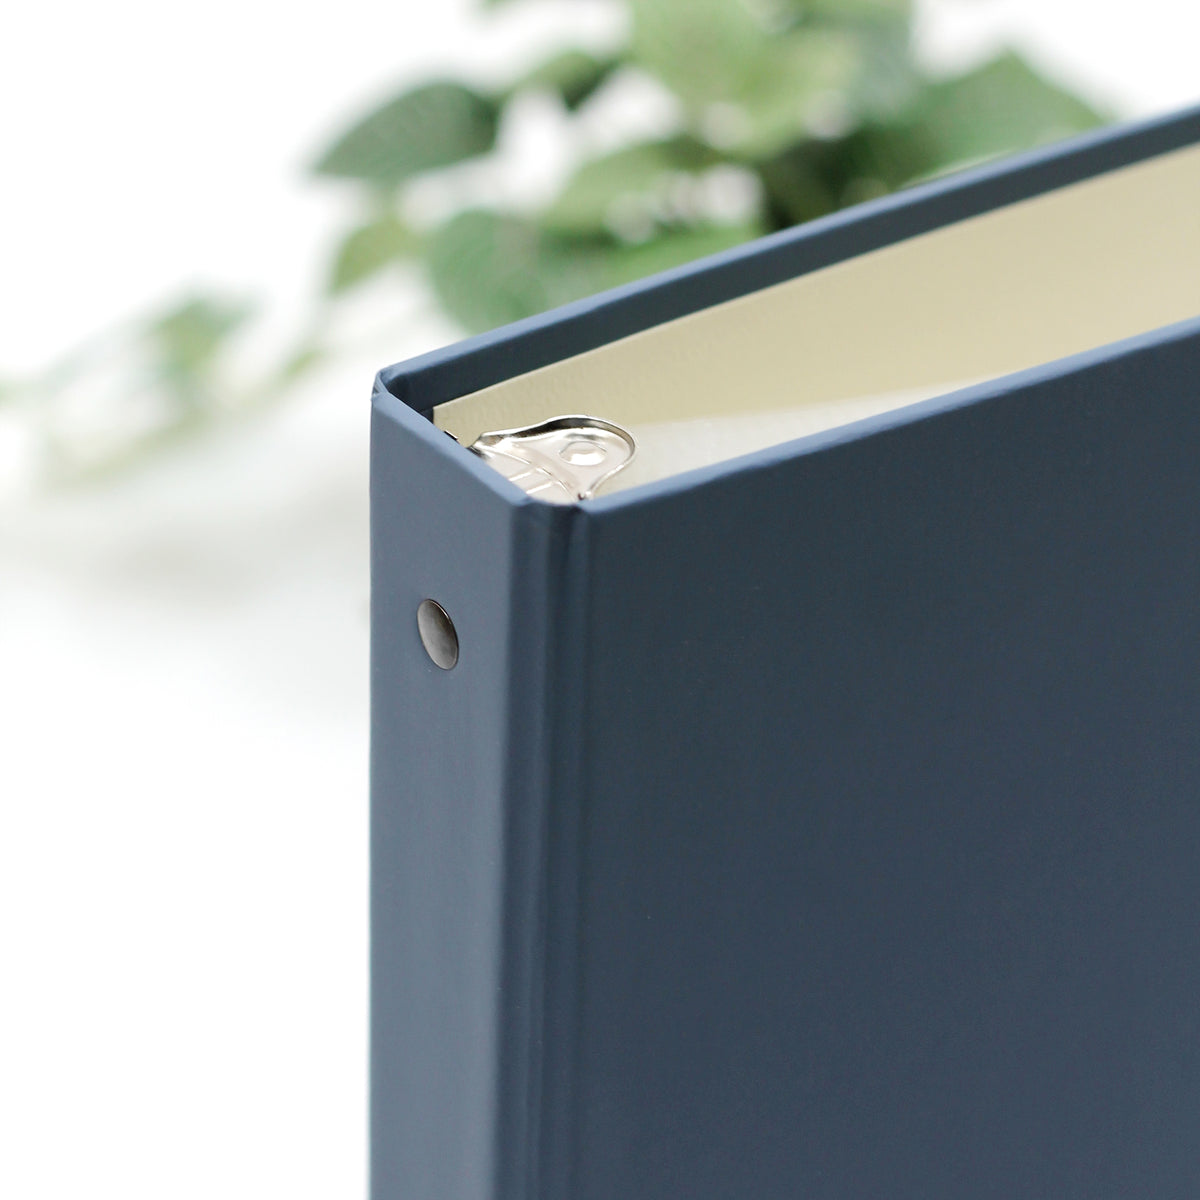 Welcome Binder with Ocean Blue Vegan Leather | Home | Air BNB